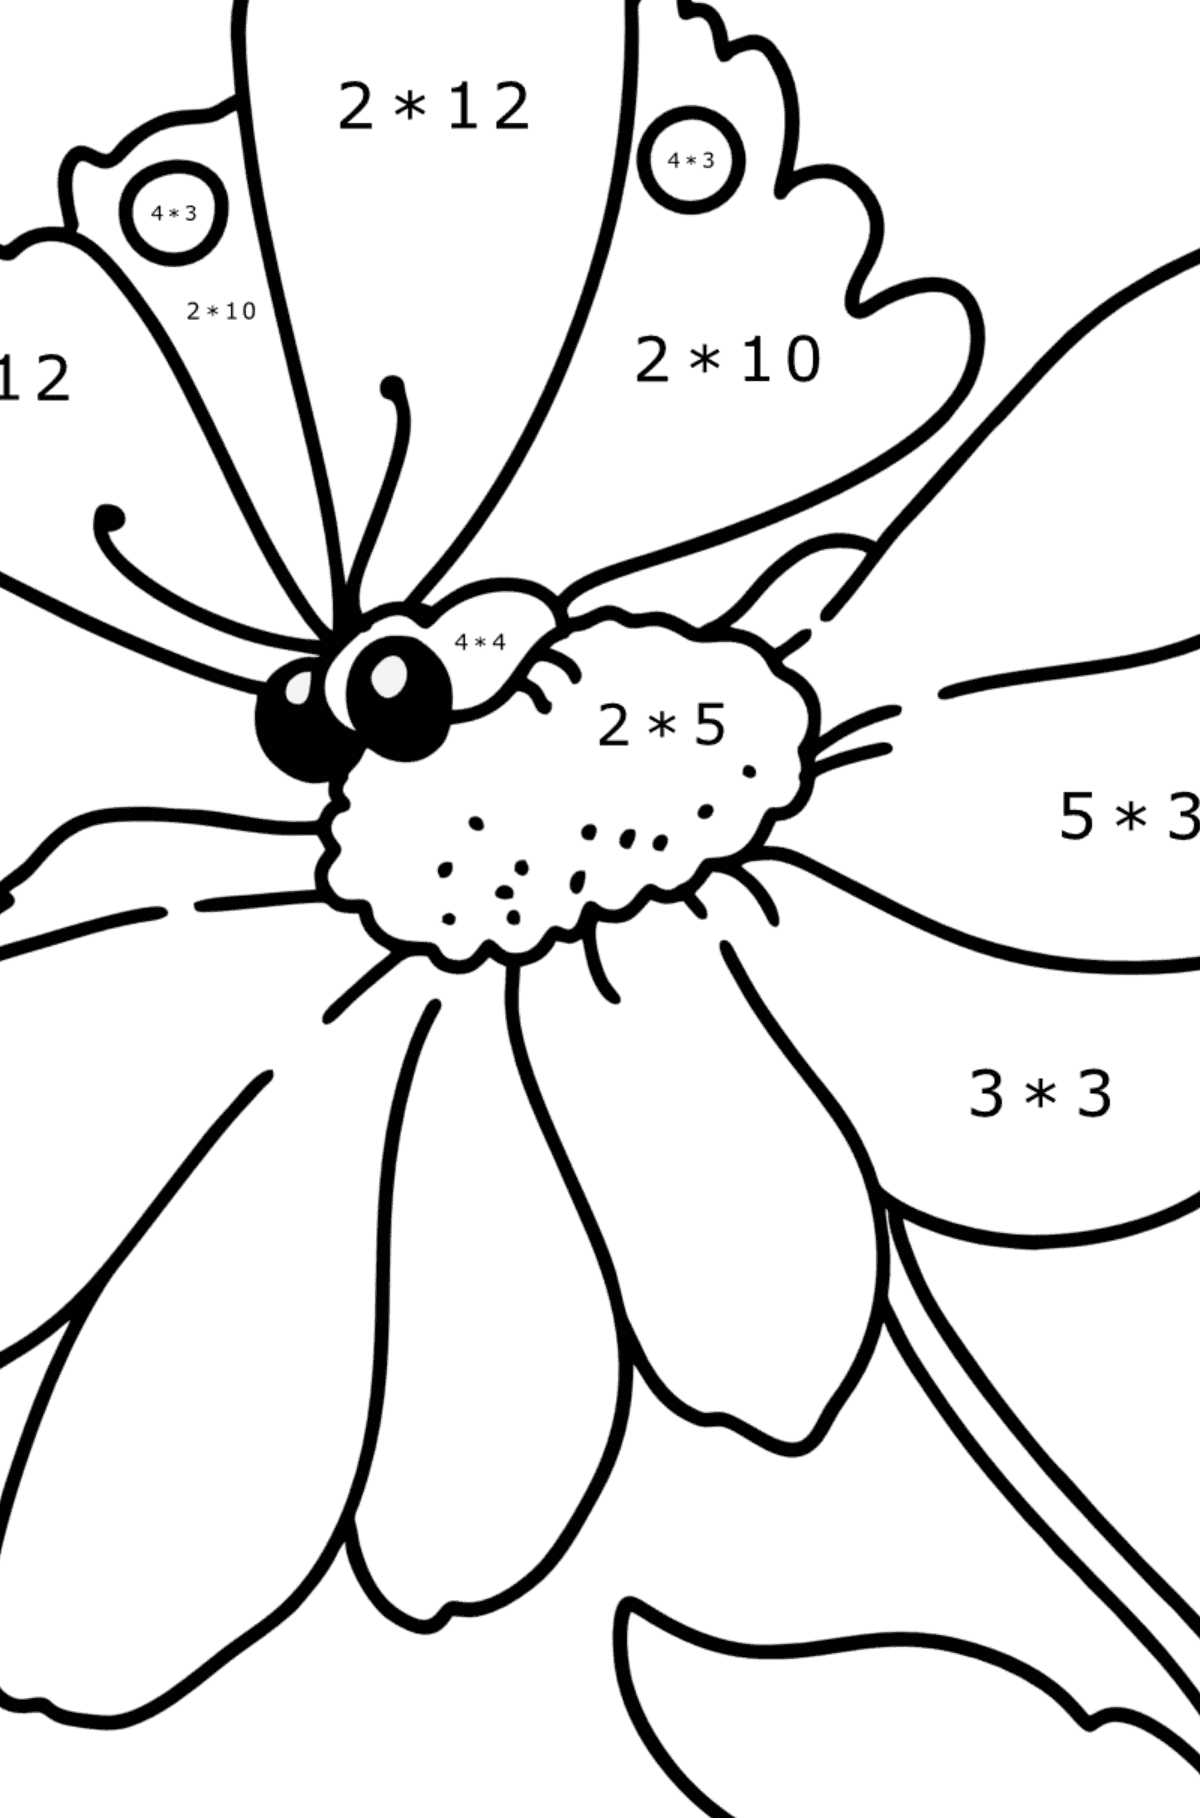 Summer Coloring page - Flowers and Butterfly - Math Coloring - Multiplication for Kids